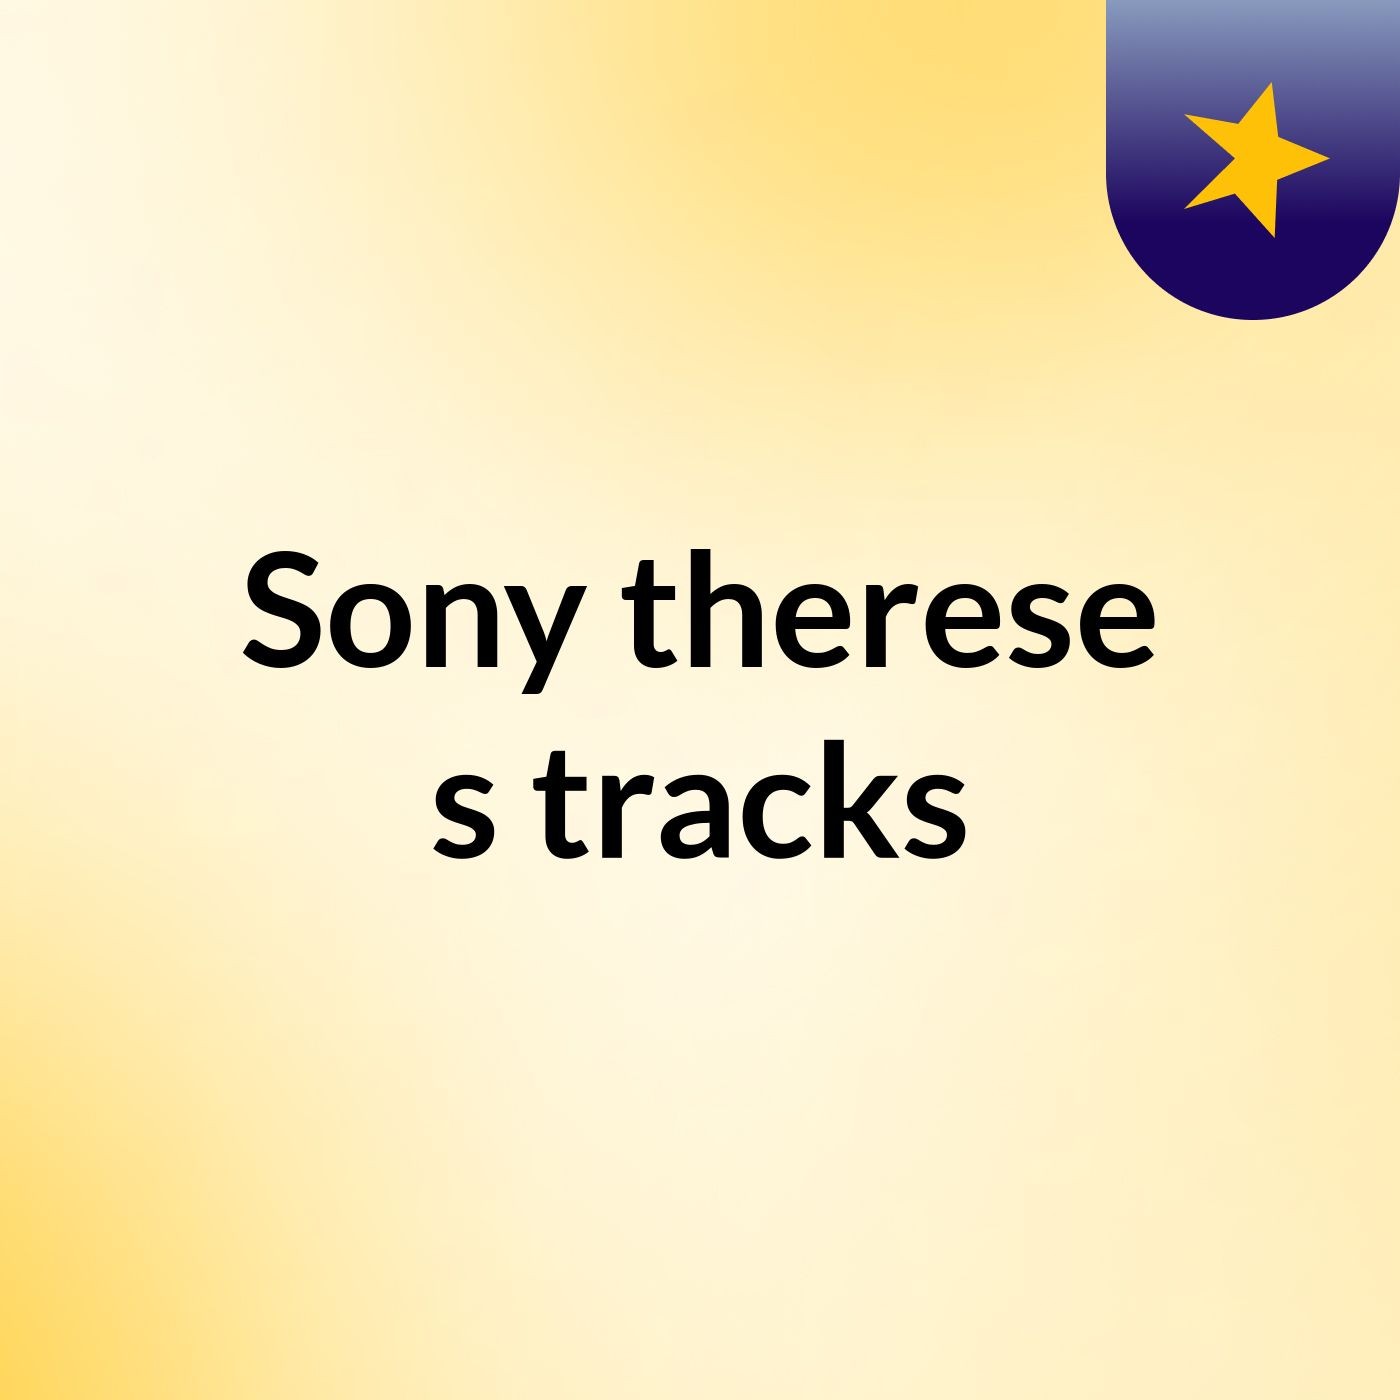 Sony therese's tracks